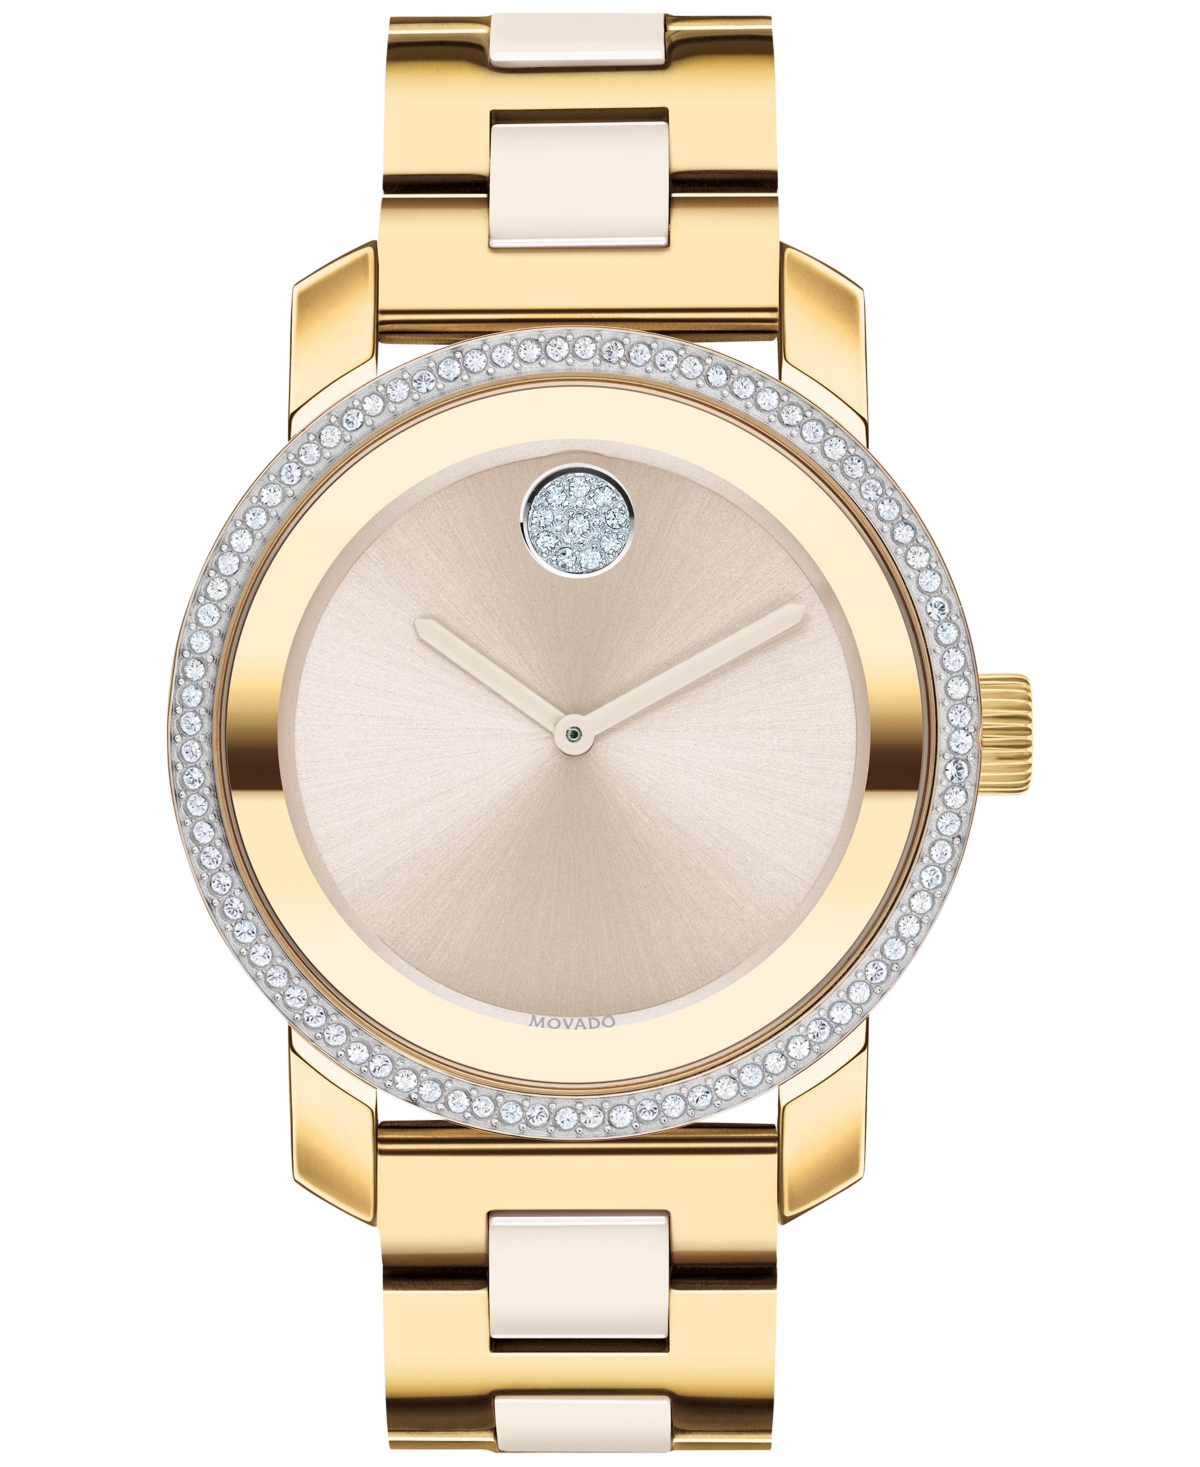 MOVADO WOMEN'S BOLD ICONIC TAUPE CERAMIC & GOLD ION PLATED STEEL BRACELET WATCH 36MM